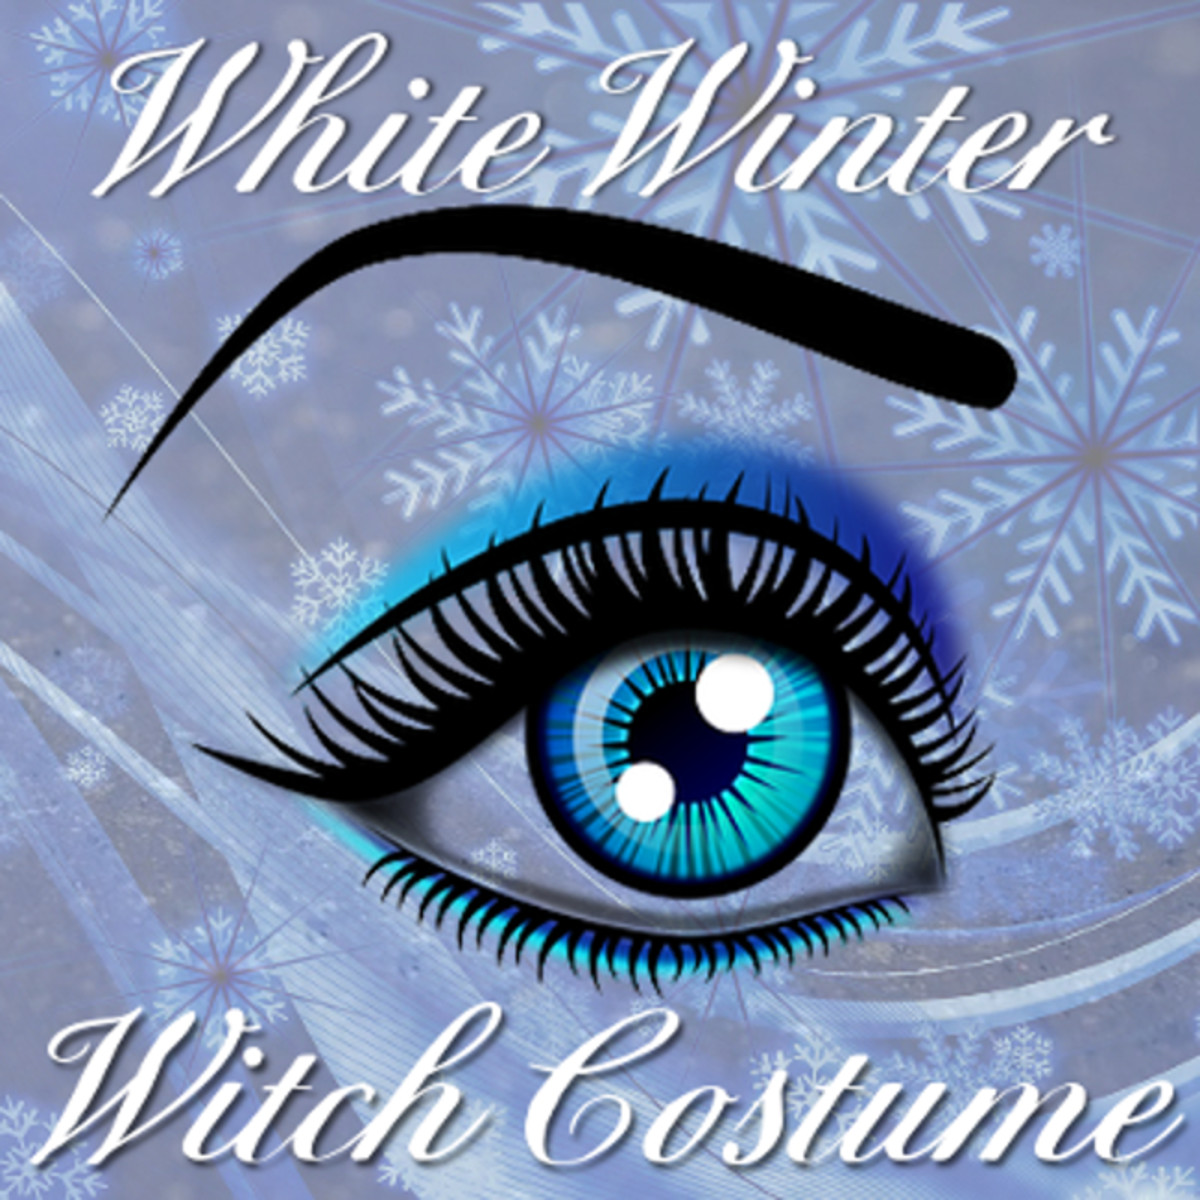 White winter witch costume and cosplay guide with lots of help from clothes, accessories and make-up